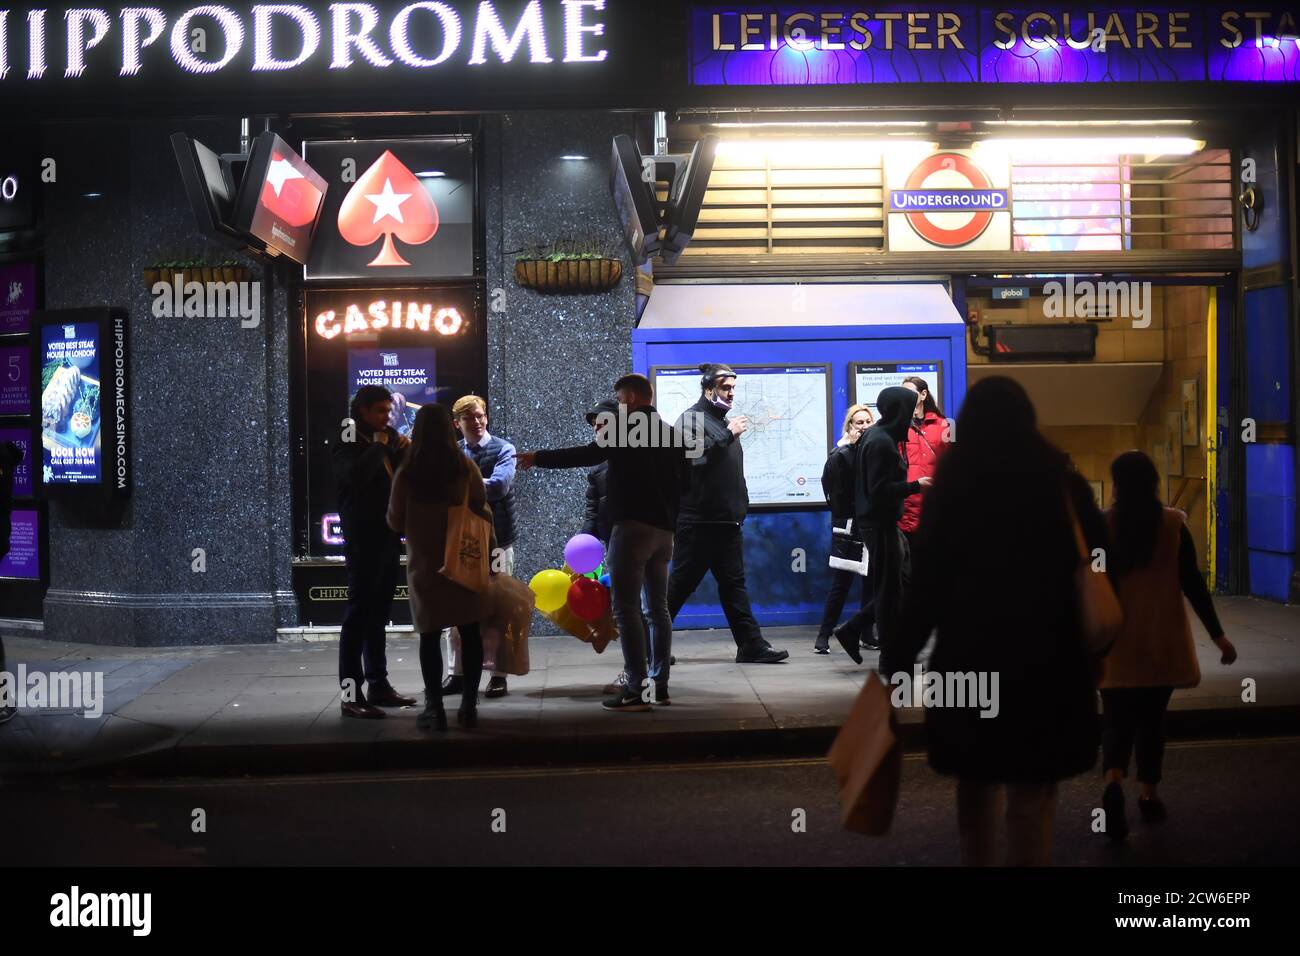 People outside Leicester Square Underground station in London, after a range of new restrictions to combat the rise in coronavirus cases came into place in England. Stock Photo